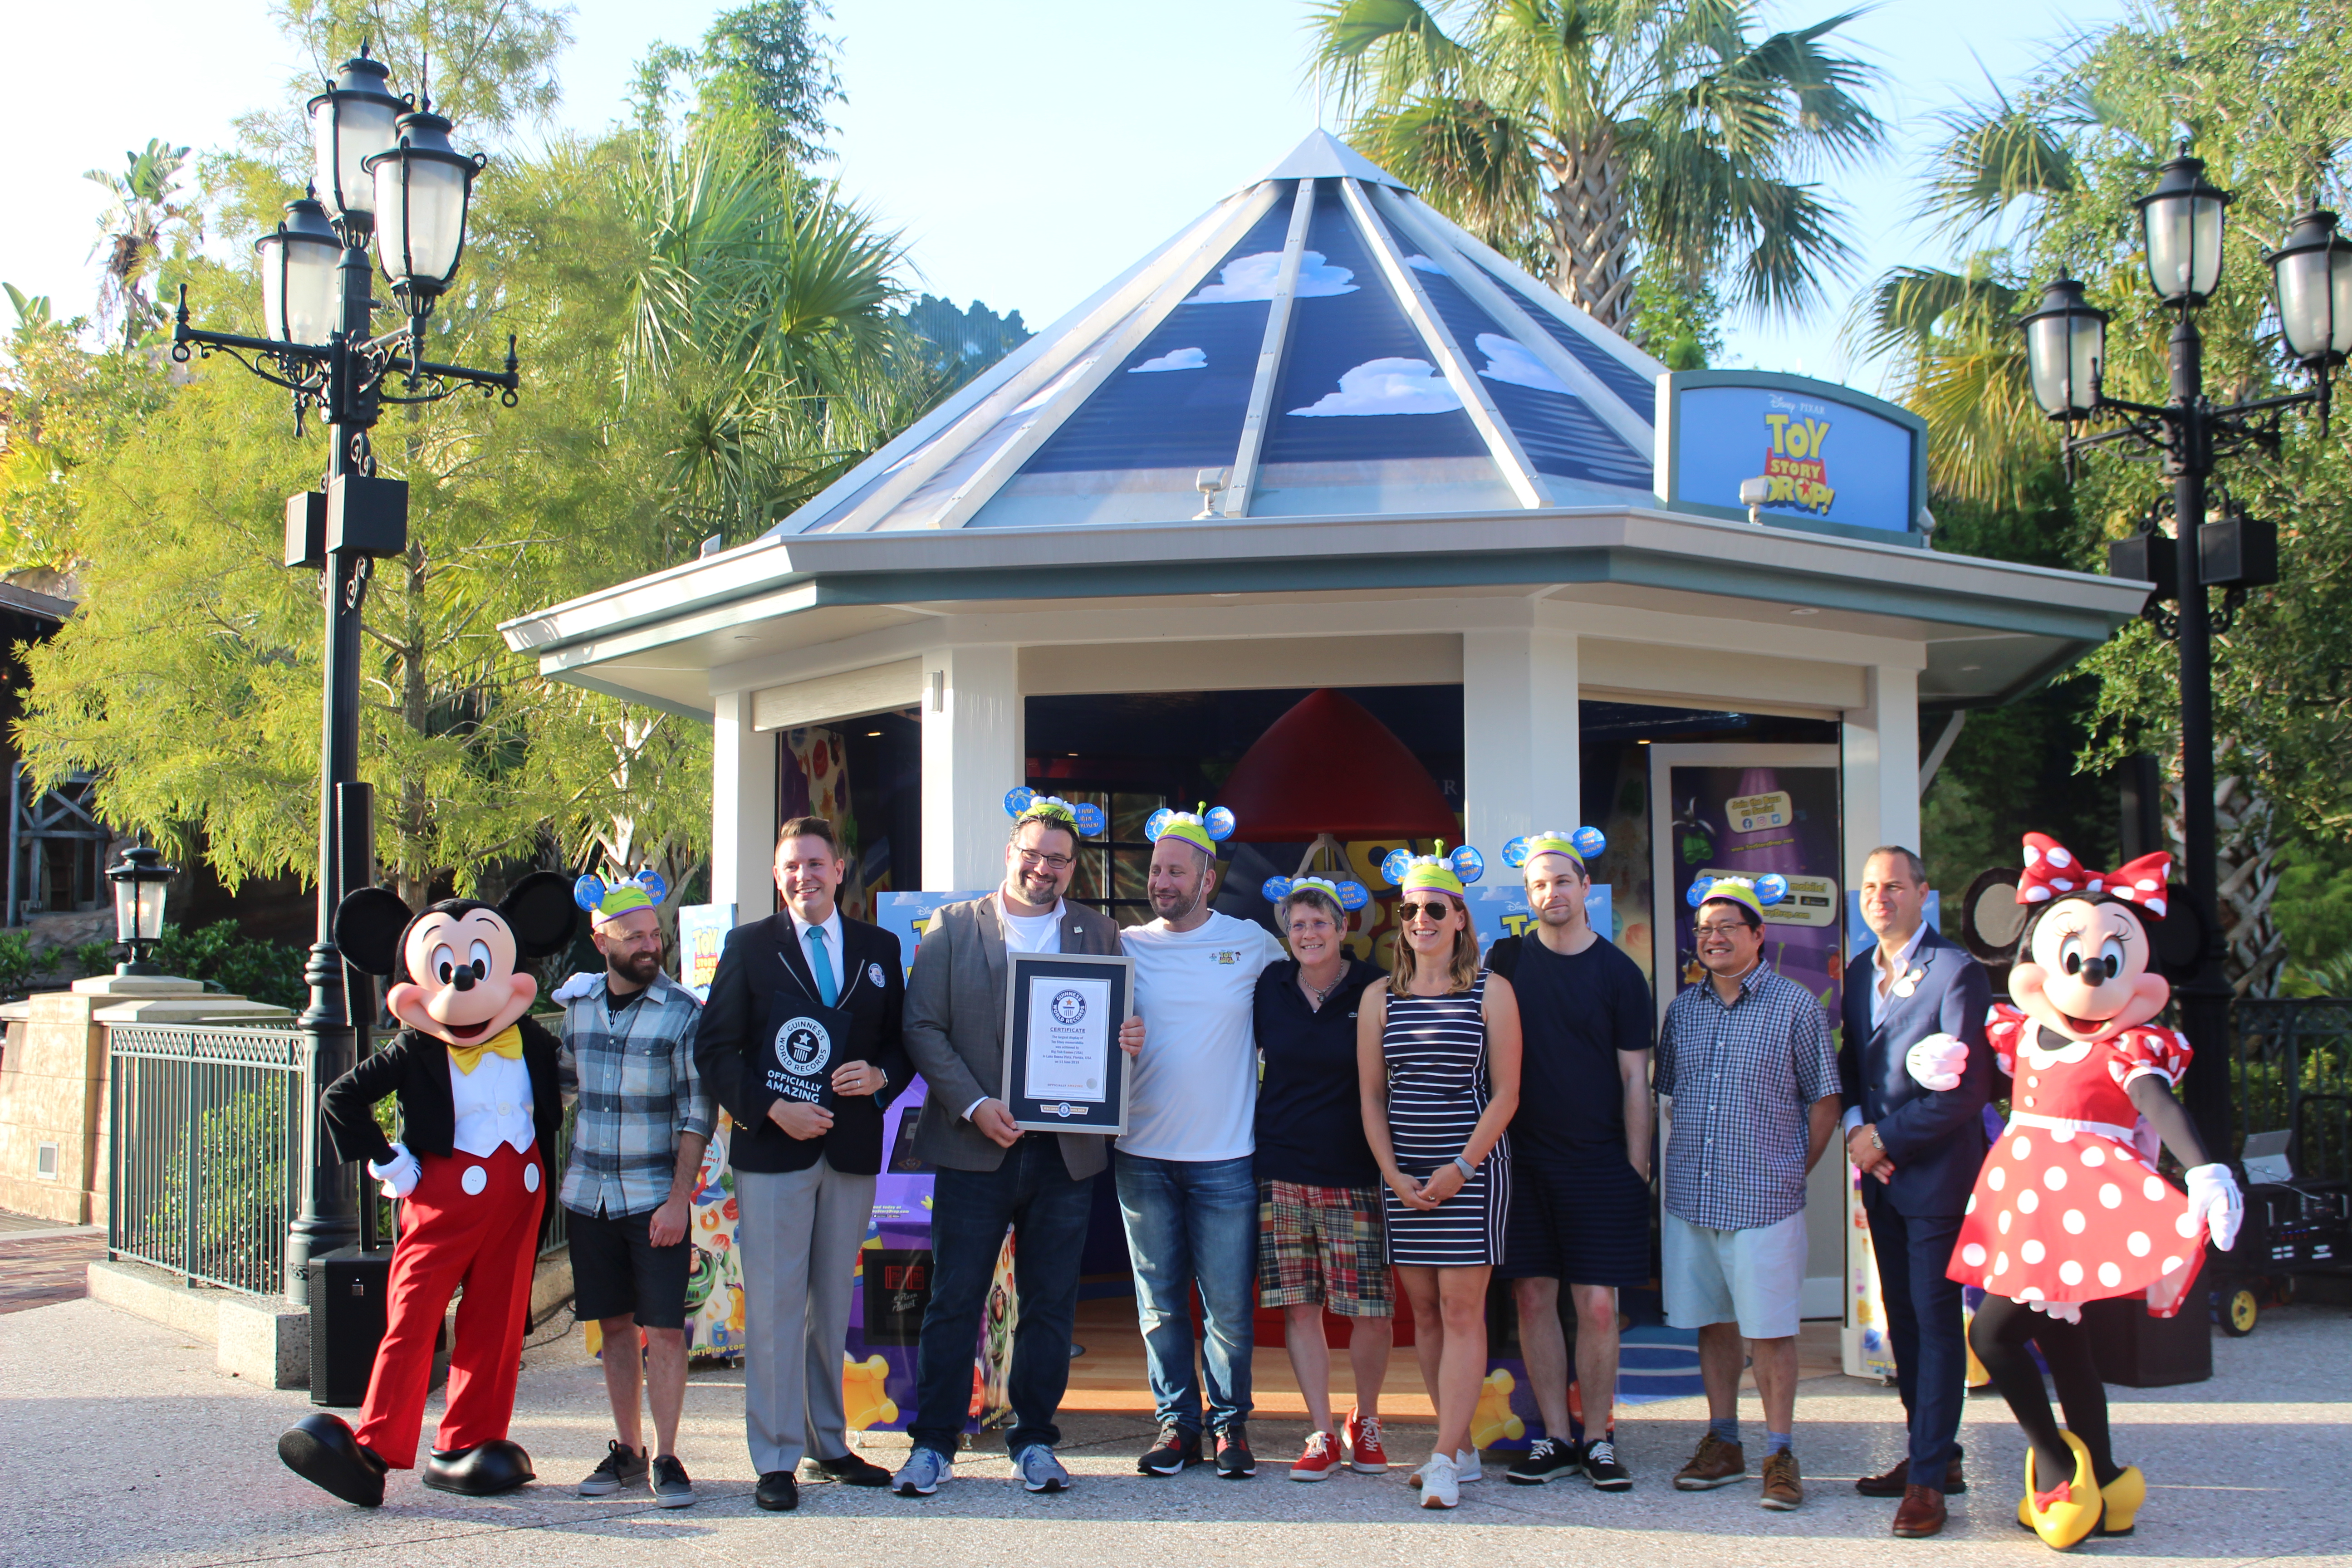 Toy Story Drop! Pop-Up Event kicks off at Disney Springs with a World Record and Ribbon Cutting